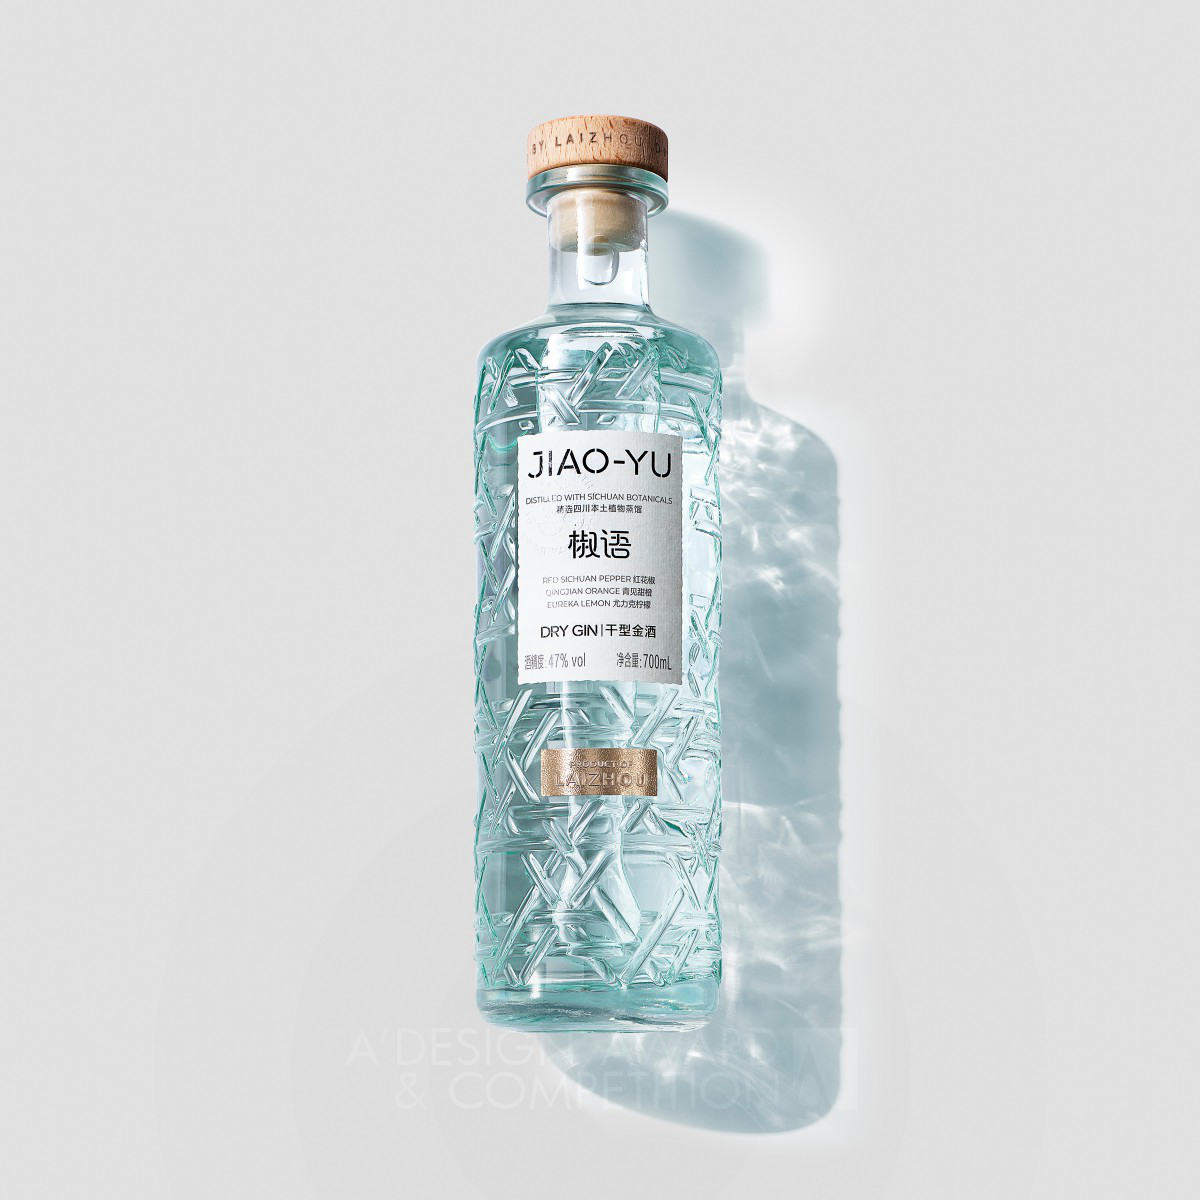 Laizhou Distillery wins Silver at the prestigious A' Packaging Design Award with Jiao Yu Gin Packaging.